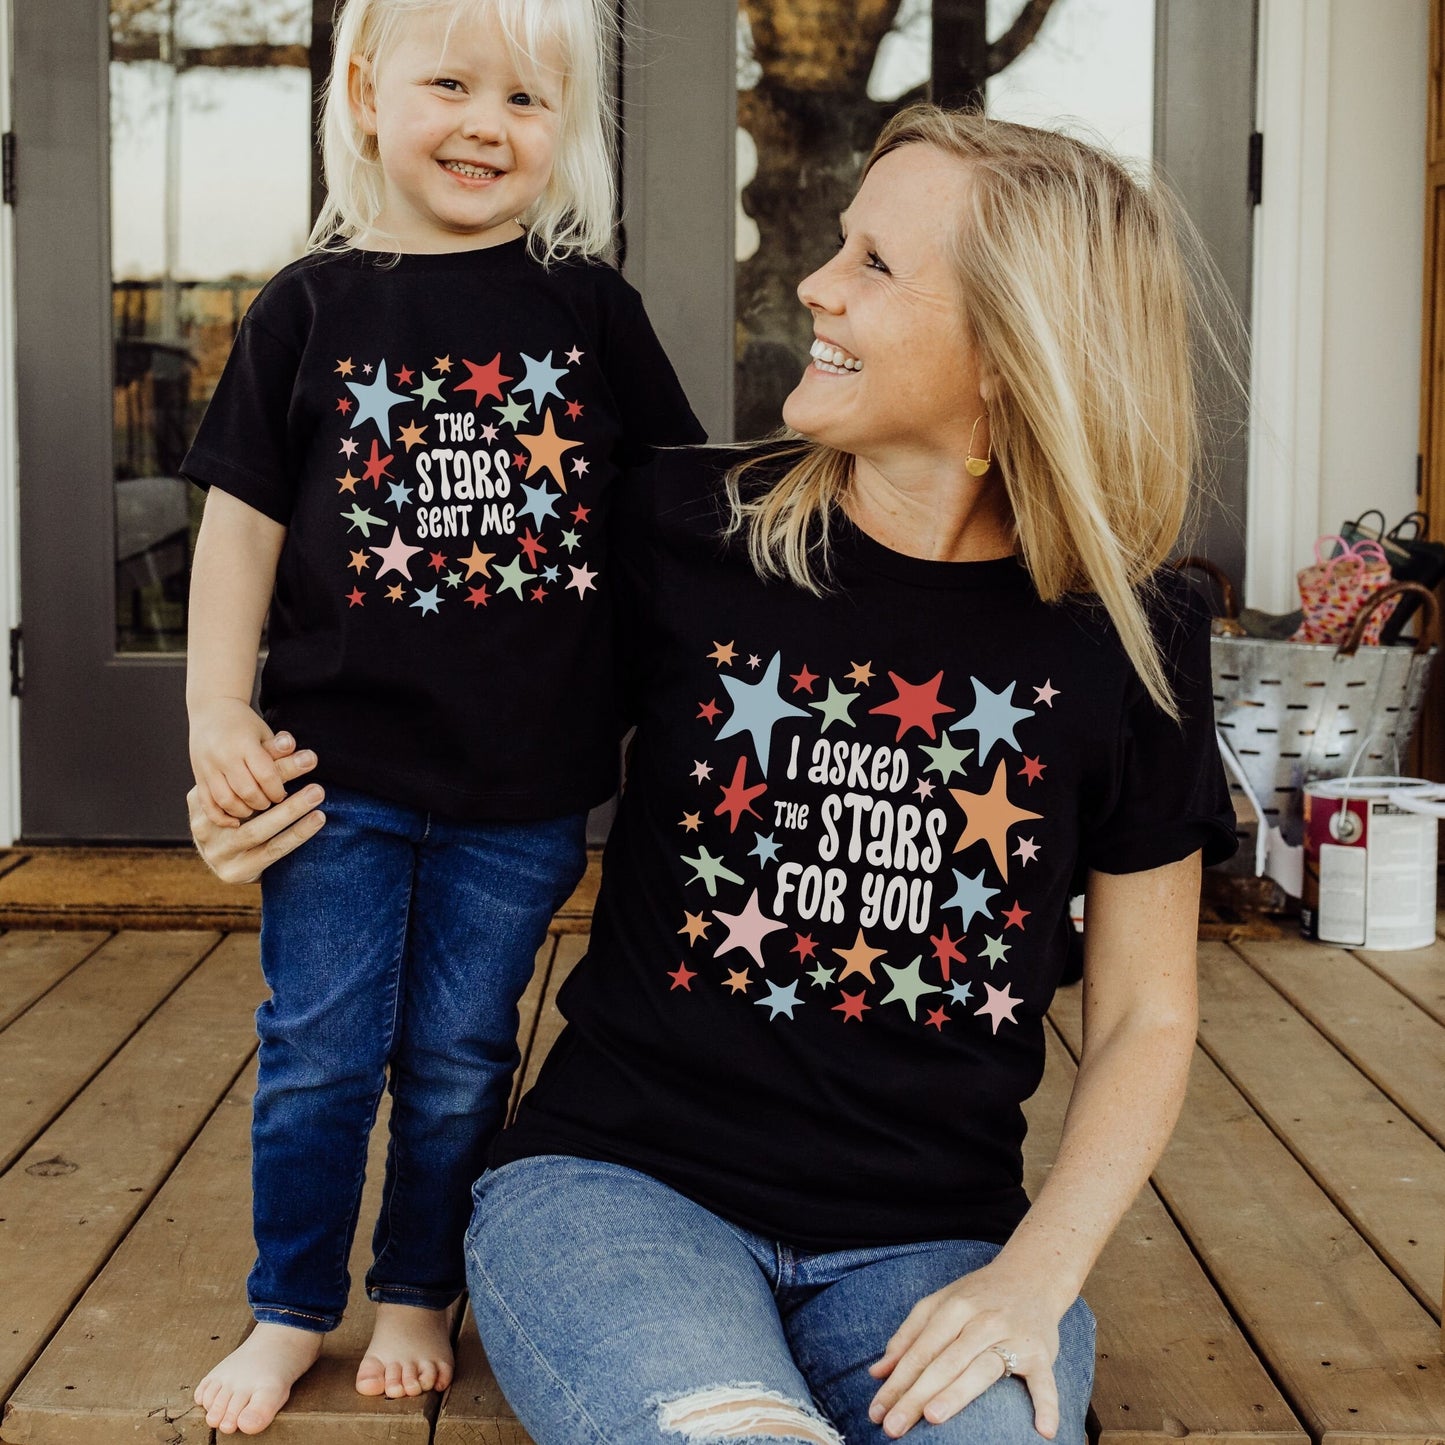 The Stars Mama Mini Shirts, Baby Bodysuit Gender Neutral Matching Family Tees IVF Adoption Gifts Rainbow Newborn Baby Gift Star Themed Party